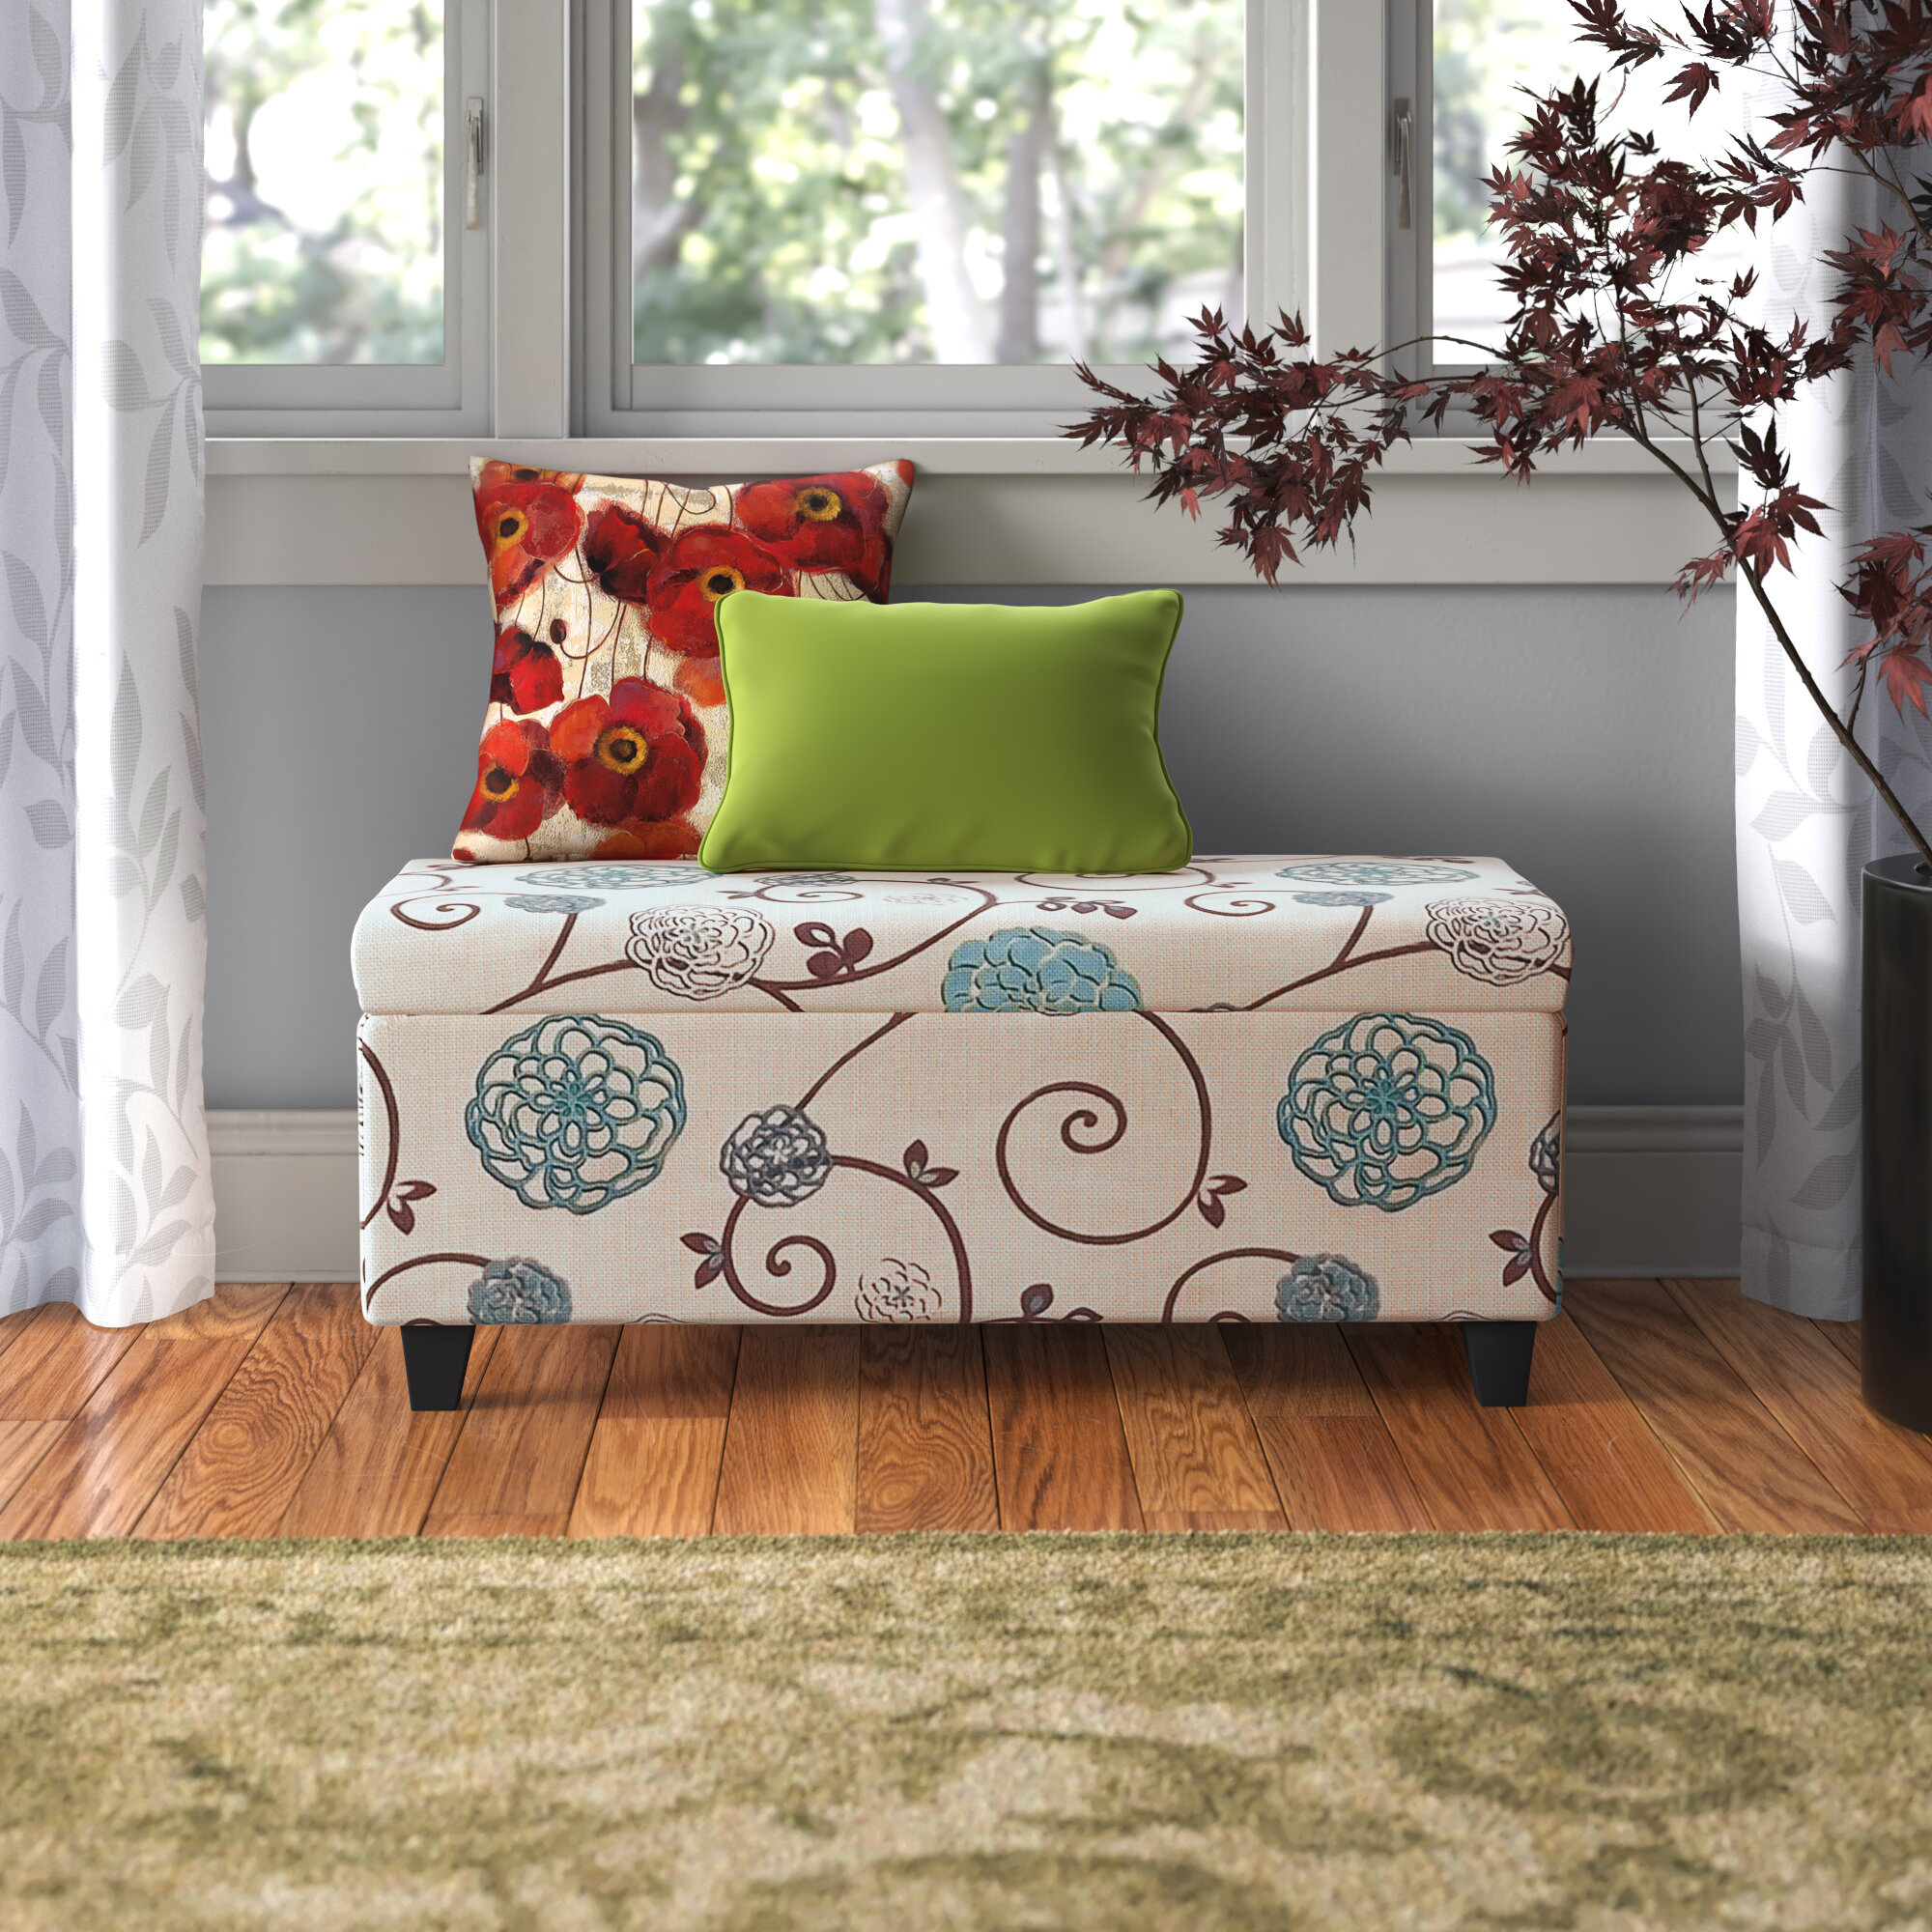 Abstract Illustration of Flat Design Colorful Flowers with Leaves Pale Peach and Multicolor Decorative Soft Foot Rest with Removable Cover Living Room and Bedroom Ambesonne Floral Ottoman Pouf 